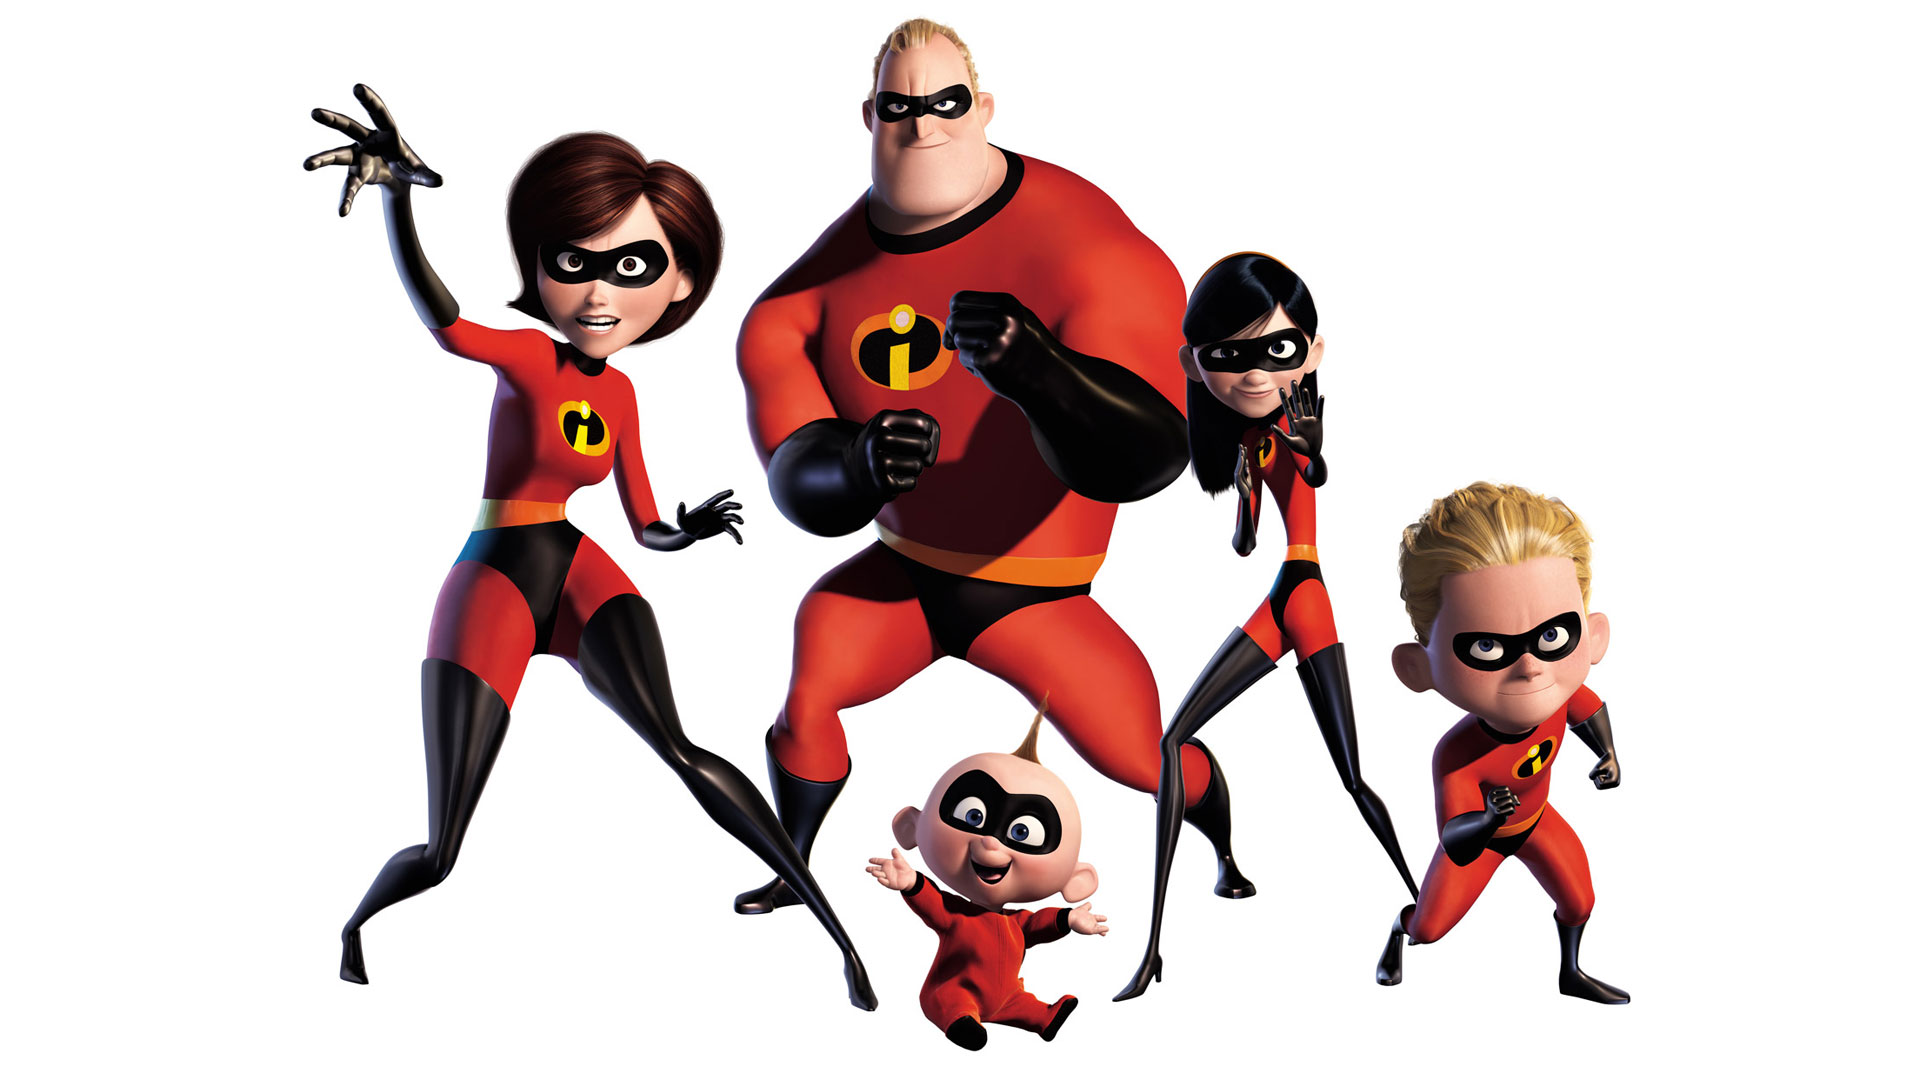 Wallpapers Family Cartoon Images Incredibles Photo 1920x1080